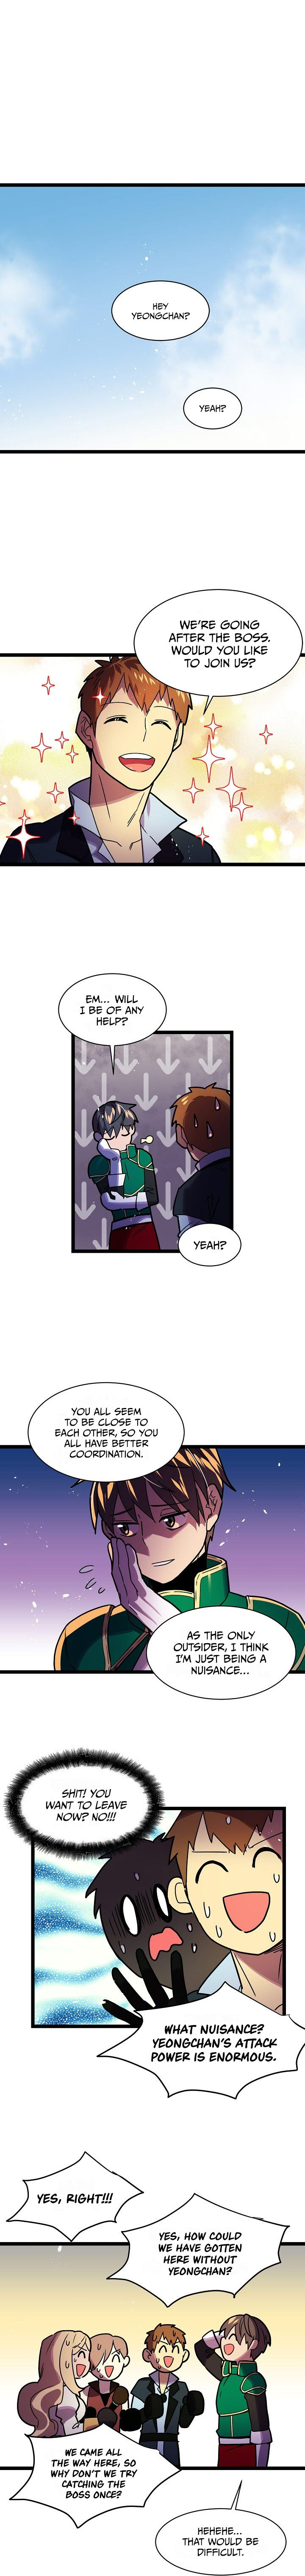 Ranker's Return - Chapter 16 Page 2